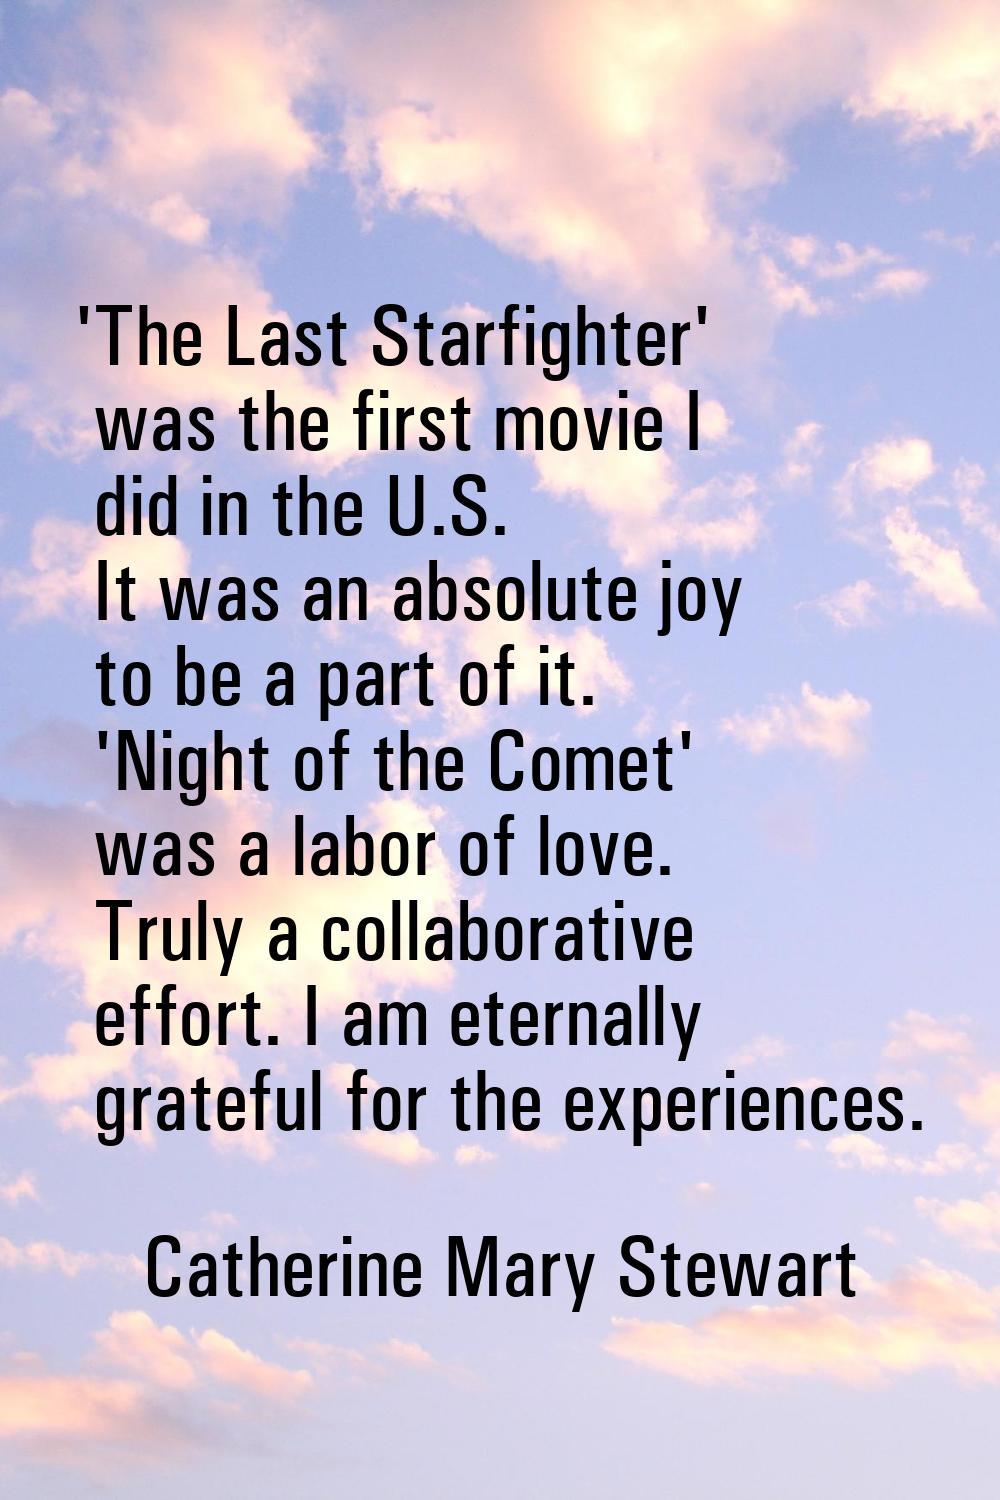 'The Last Starfighter' was the first movie I did in the U.S. It was an absolute joy to be a part of